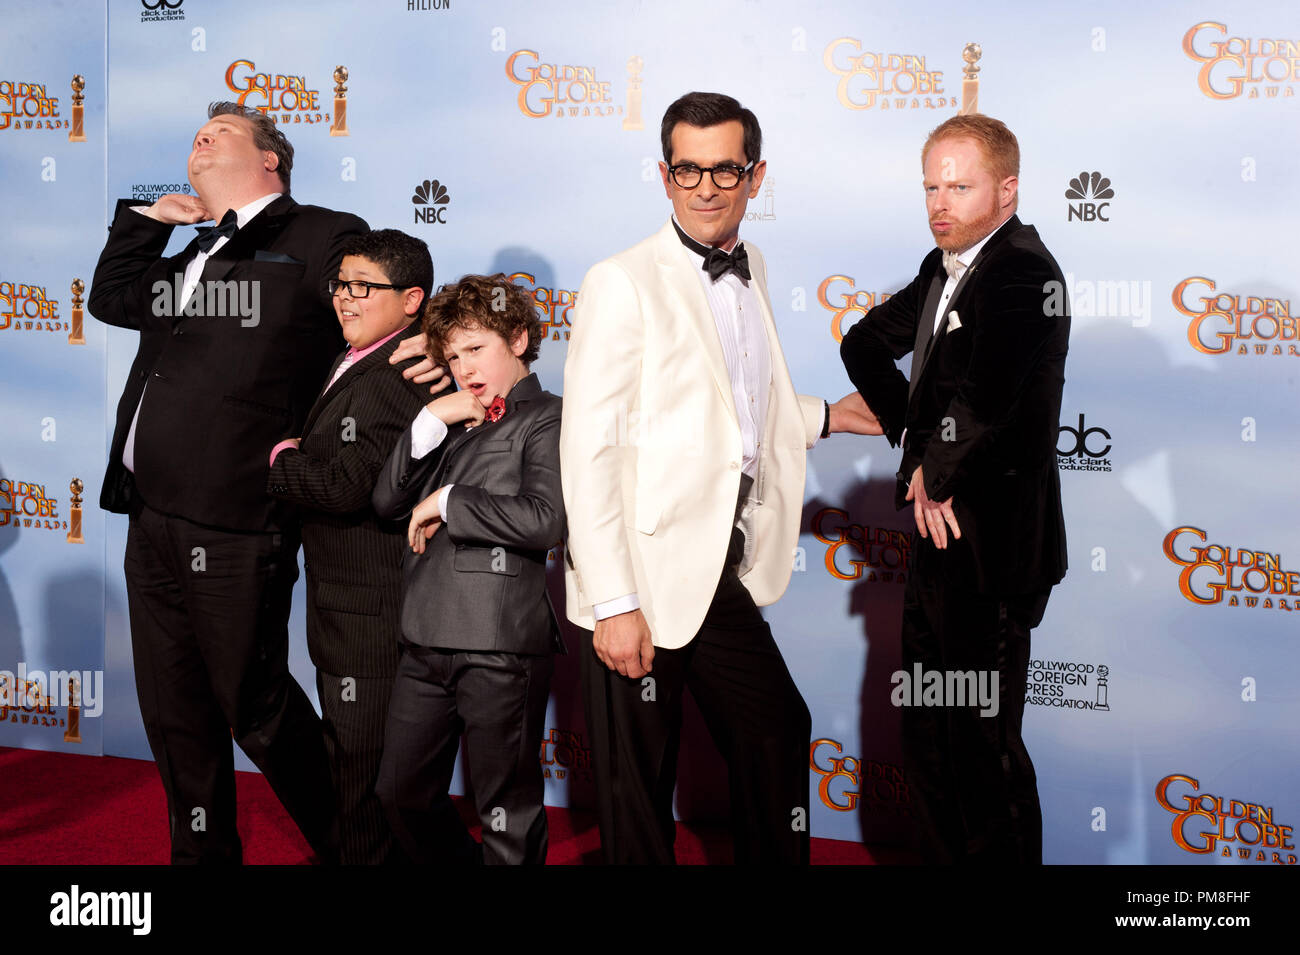 For BEST TELEVISION SERIES – COMEDY OR MUSICAL, the Golden Globe is awarded to “Modern Family” (ABC), produced by Twentieth Century Fox Television. Accepting the award are Eric Stonestreet, Rico Rodriguez, Nolan Gould, Ty Burrell, and Jesse Tyler Ferguson backstage in the press room at the 69th Annual Golden Globe Awards at the Beverly Hilton in Beverly Hills, CA on Sunday, January 15, 2012. Stock Photo